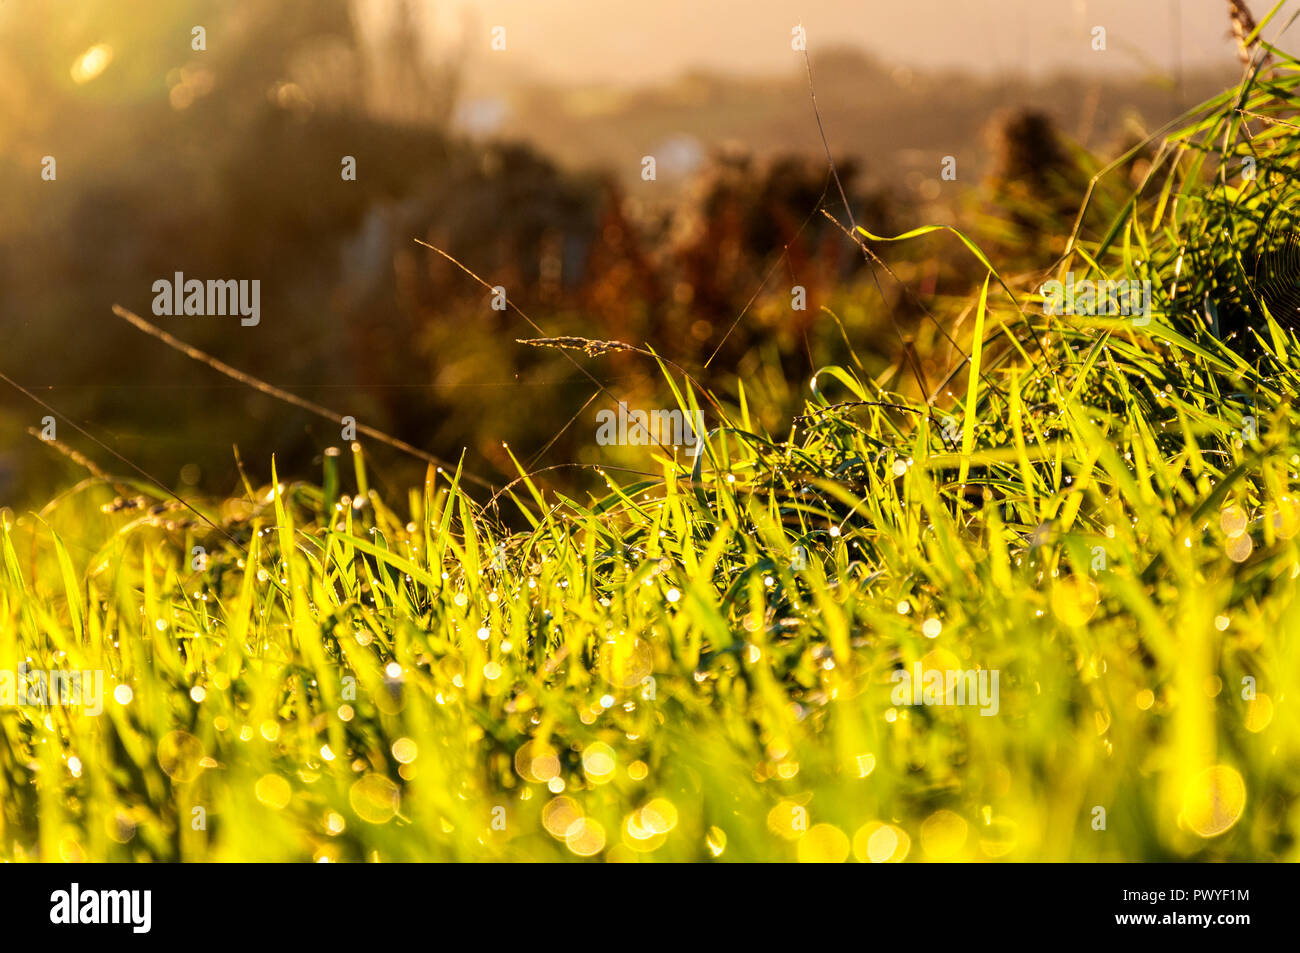 Morning dew on grass concept Stock Photo